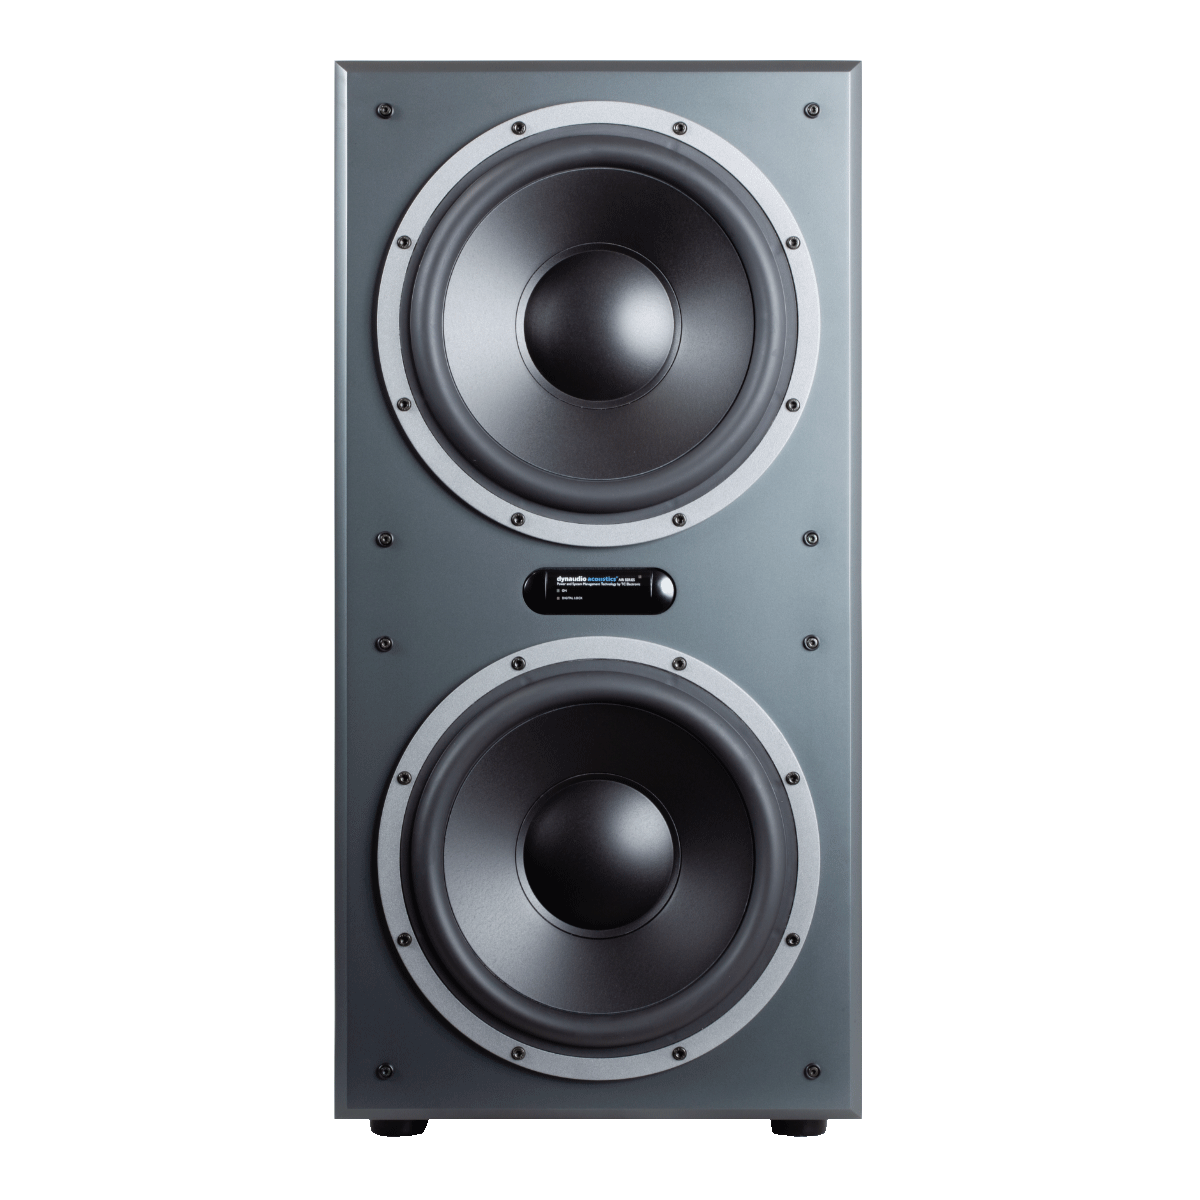 AIR BASE 24 subwoofers - Ultimate precision integration